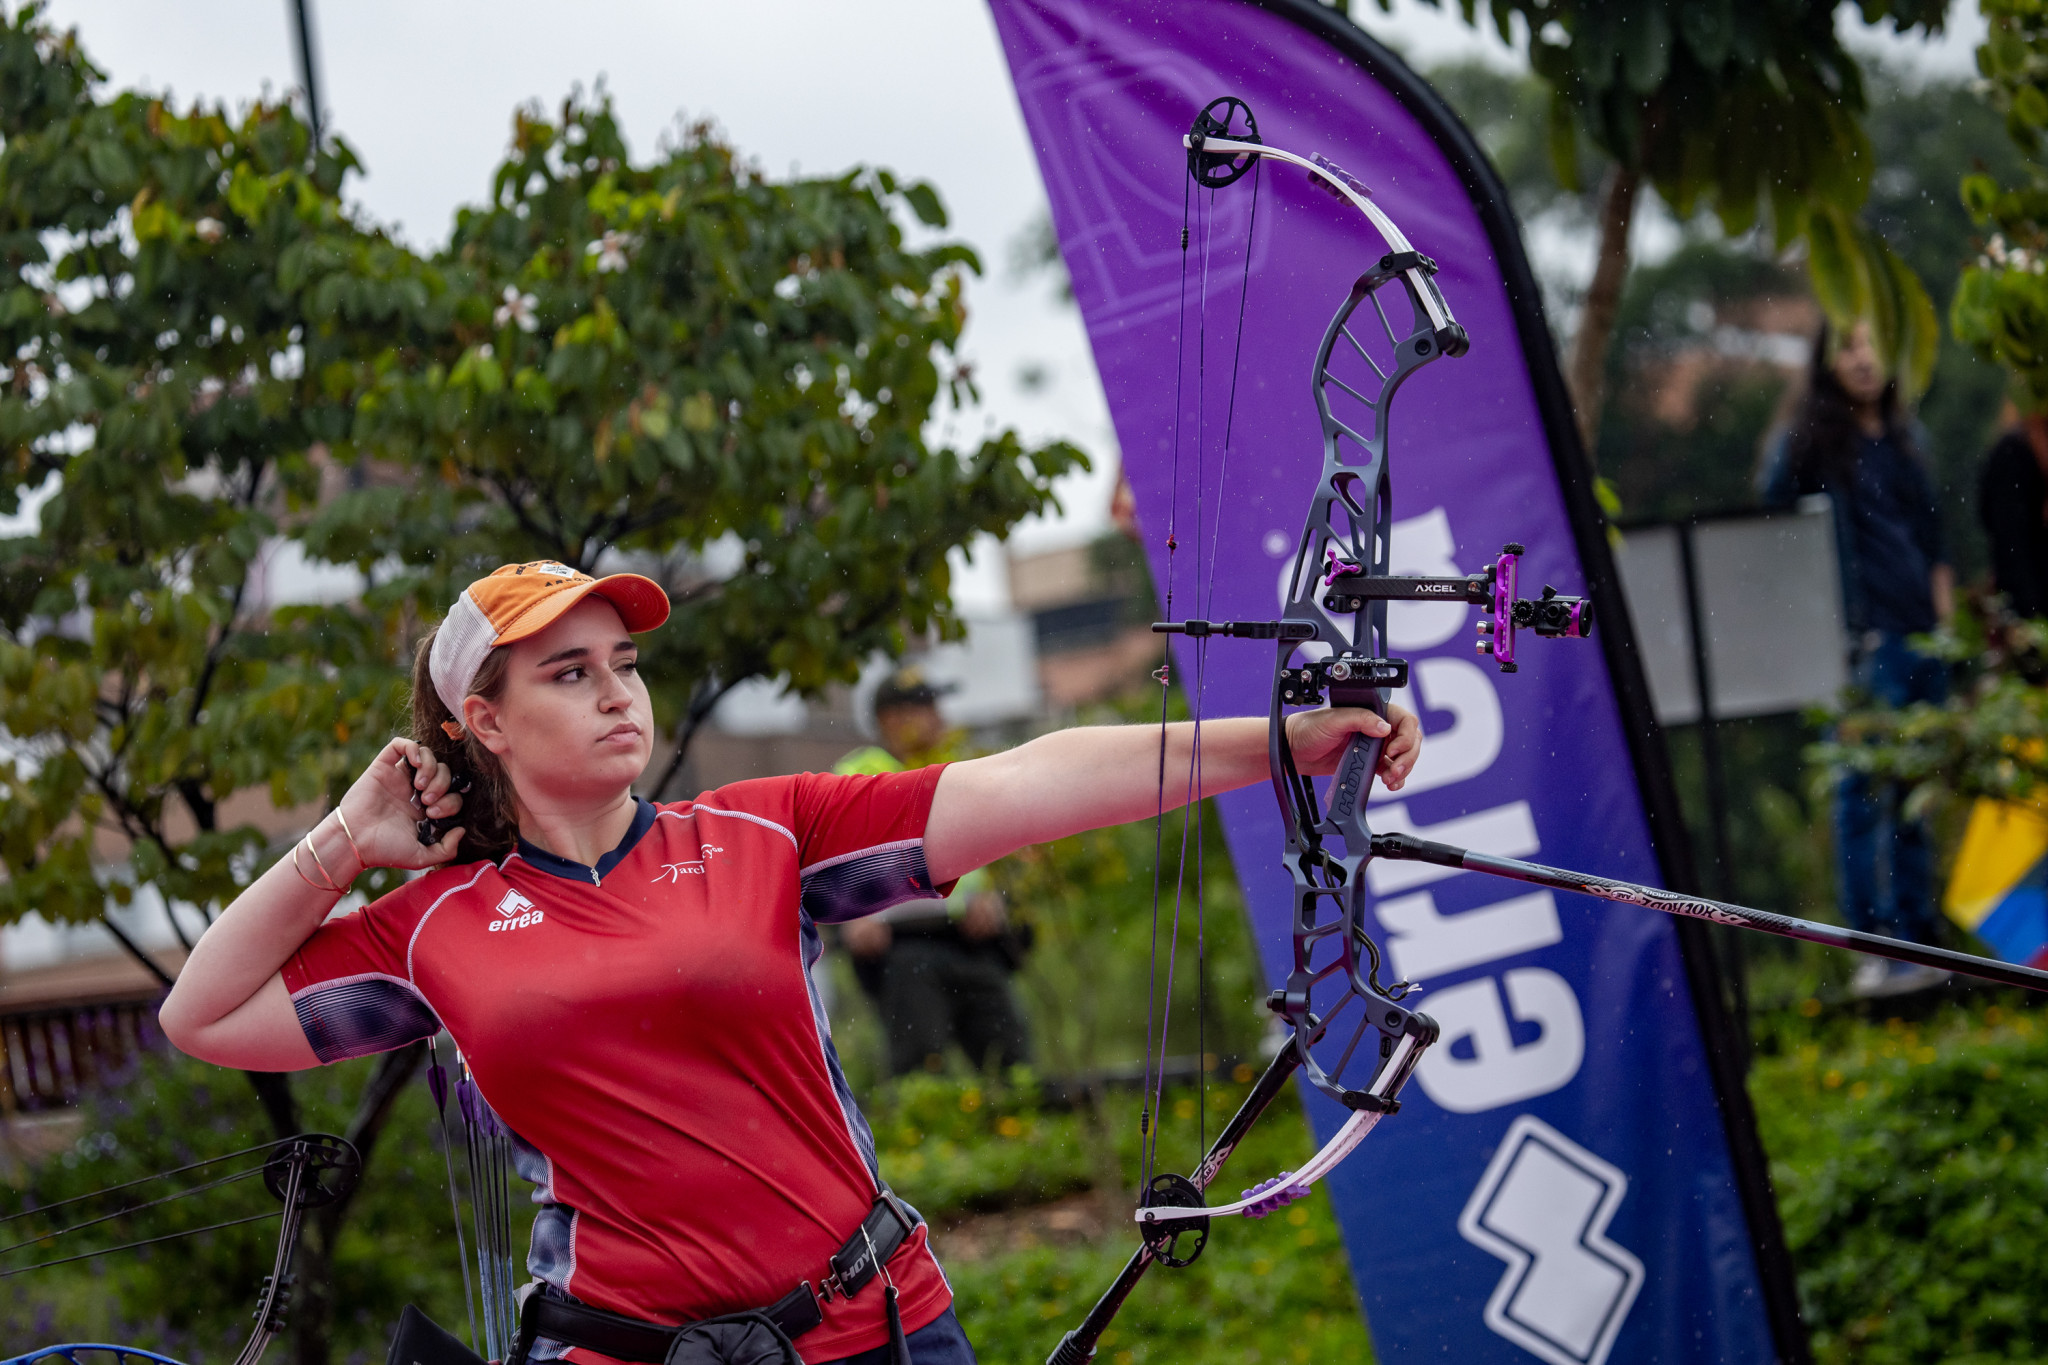 Gibson and Lutz compound winners at Medellín Archery World Cup